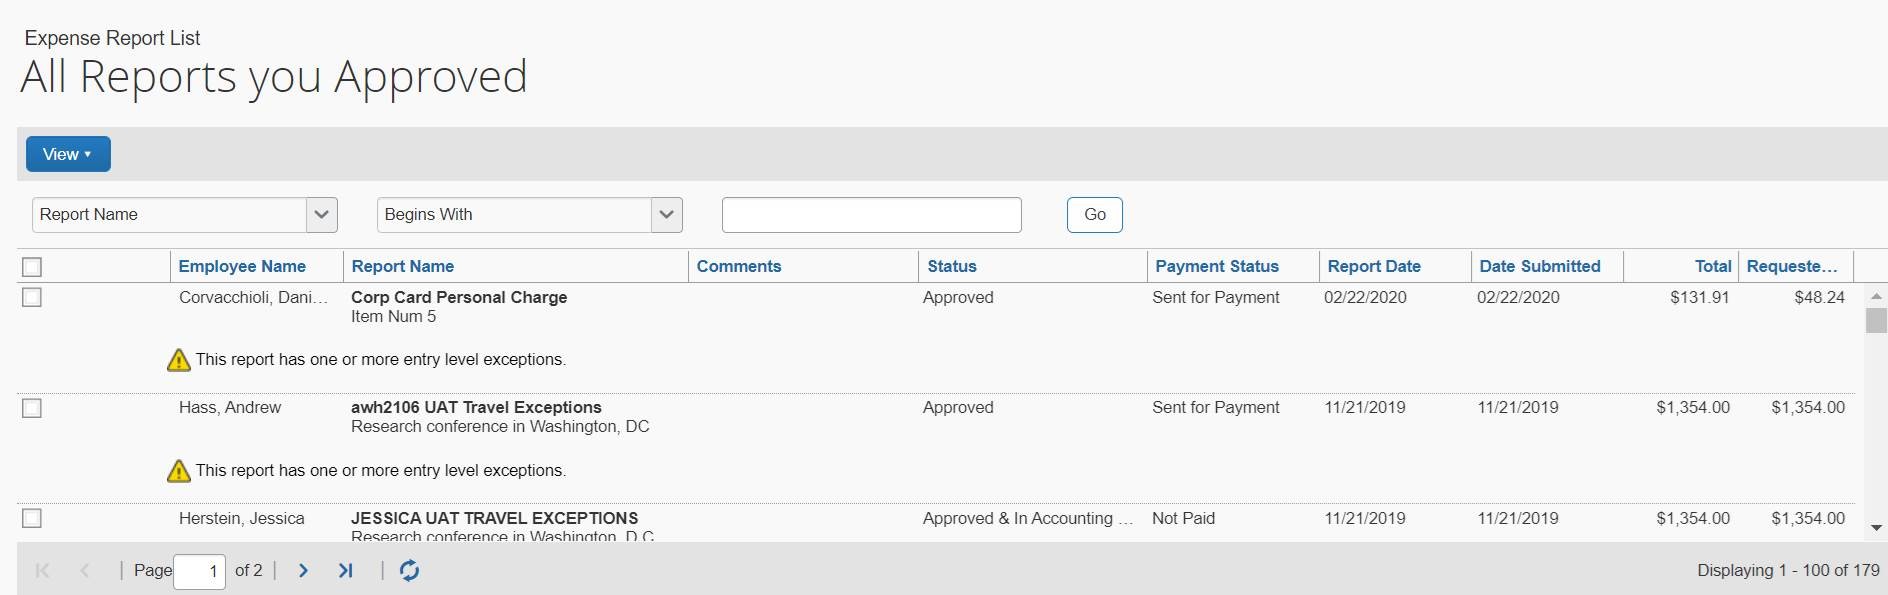 Screenshot of all reports you approved page in Concur.